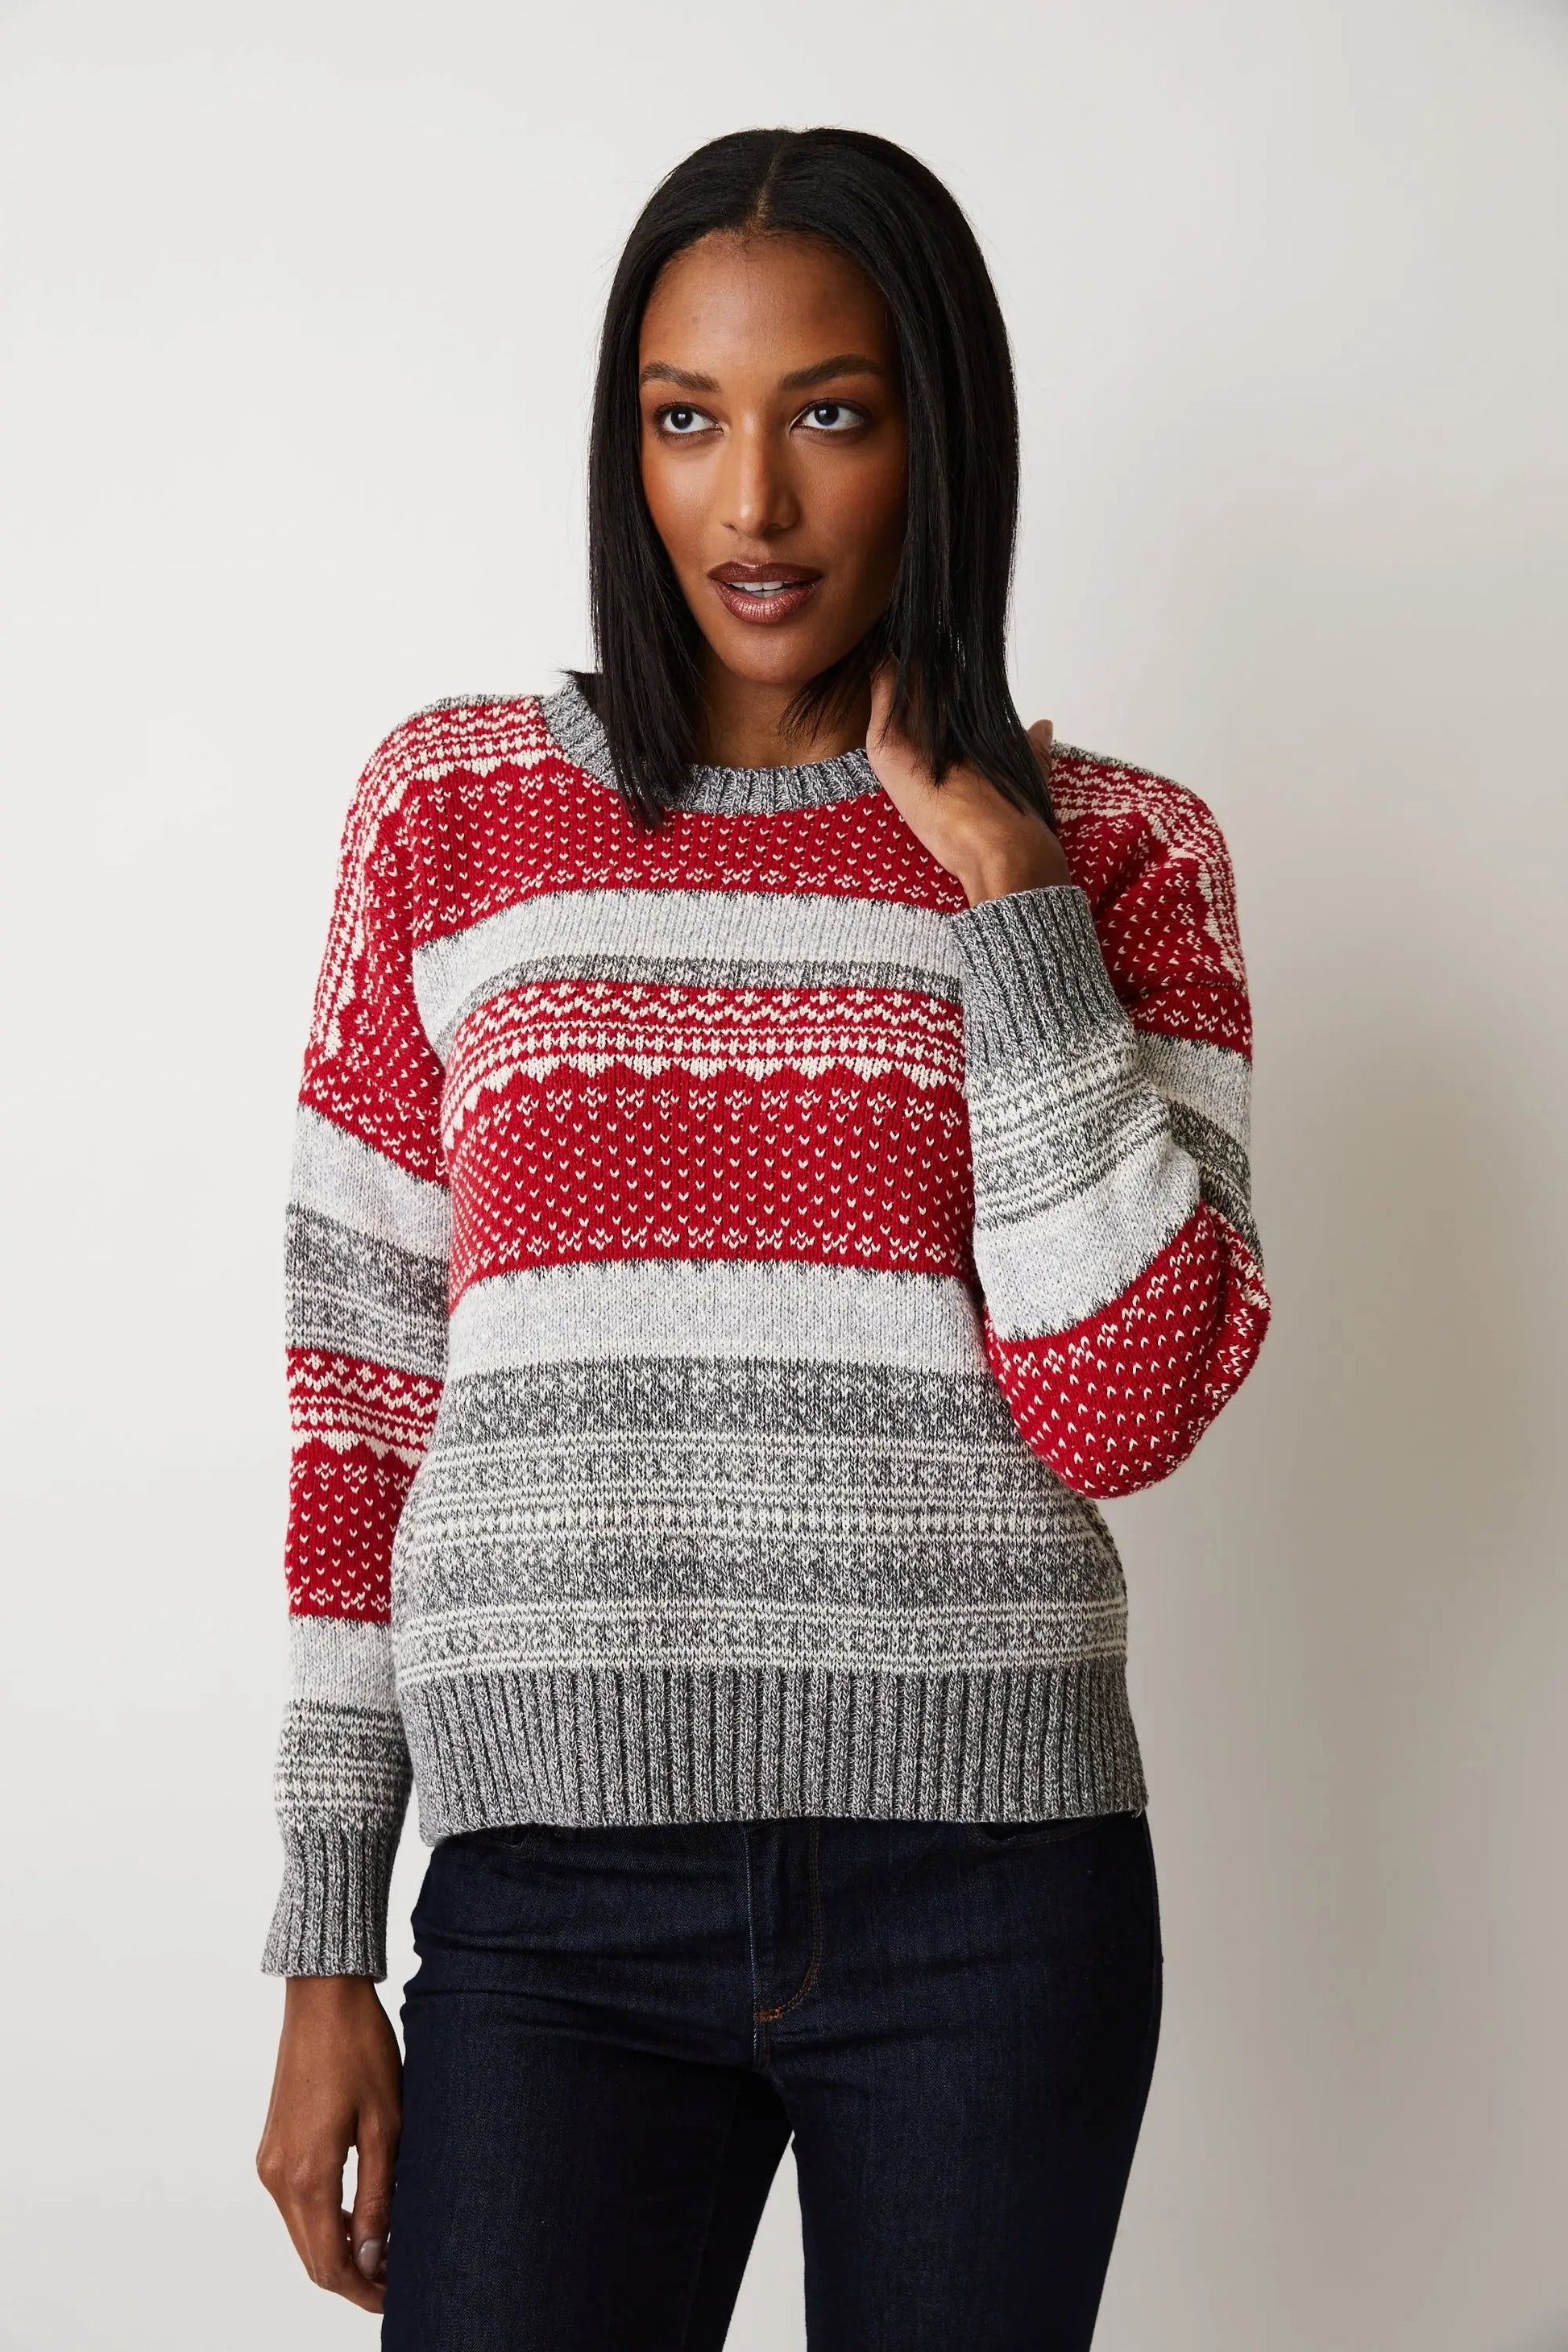 A young woman wearing a red Cotton Country Brighton Fairisle Crew | Grey Red sweater and hat, embracing the winter spirit with a cozy wool blend.